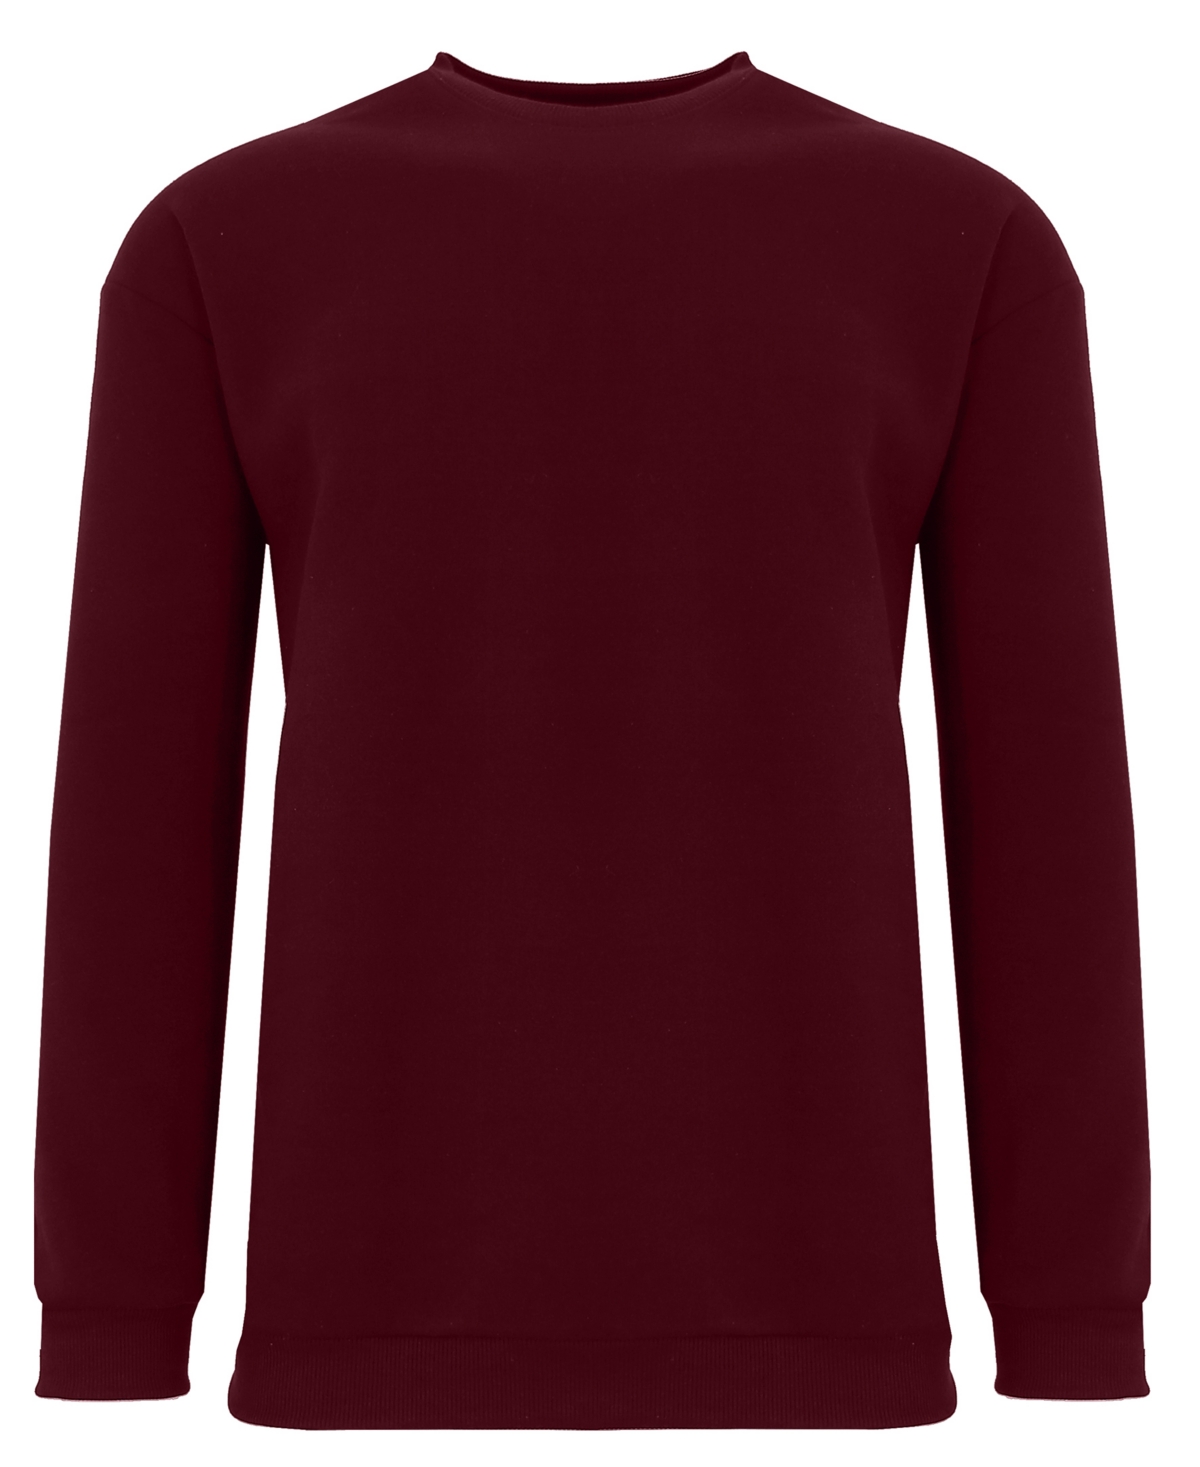 Men's Pullover Sweater - Red